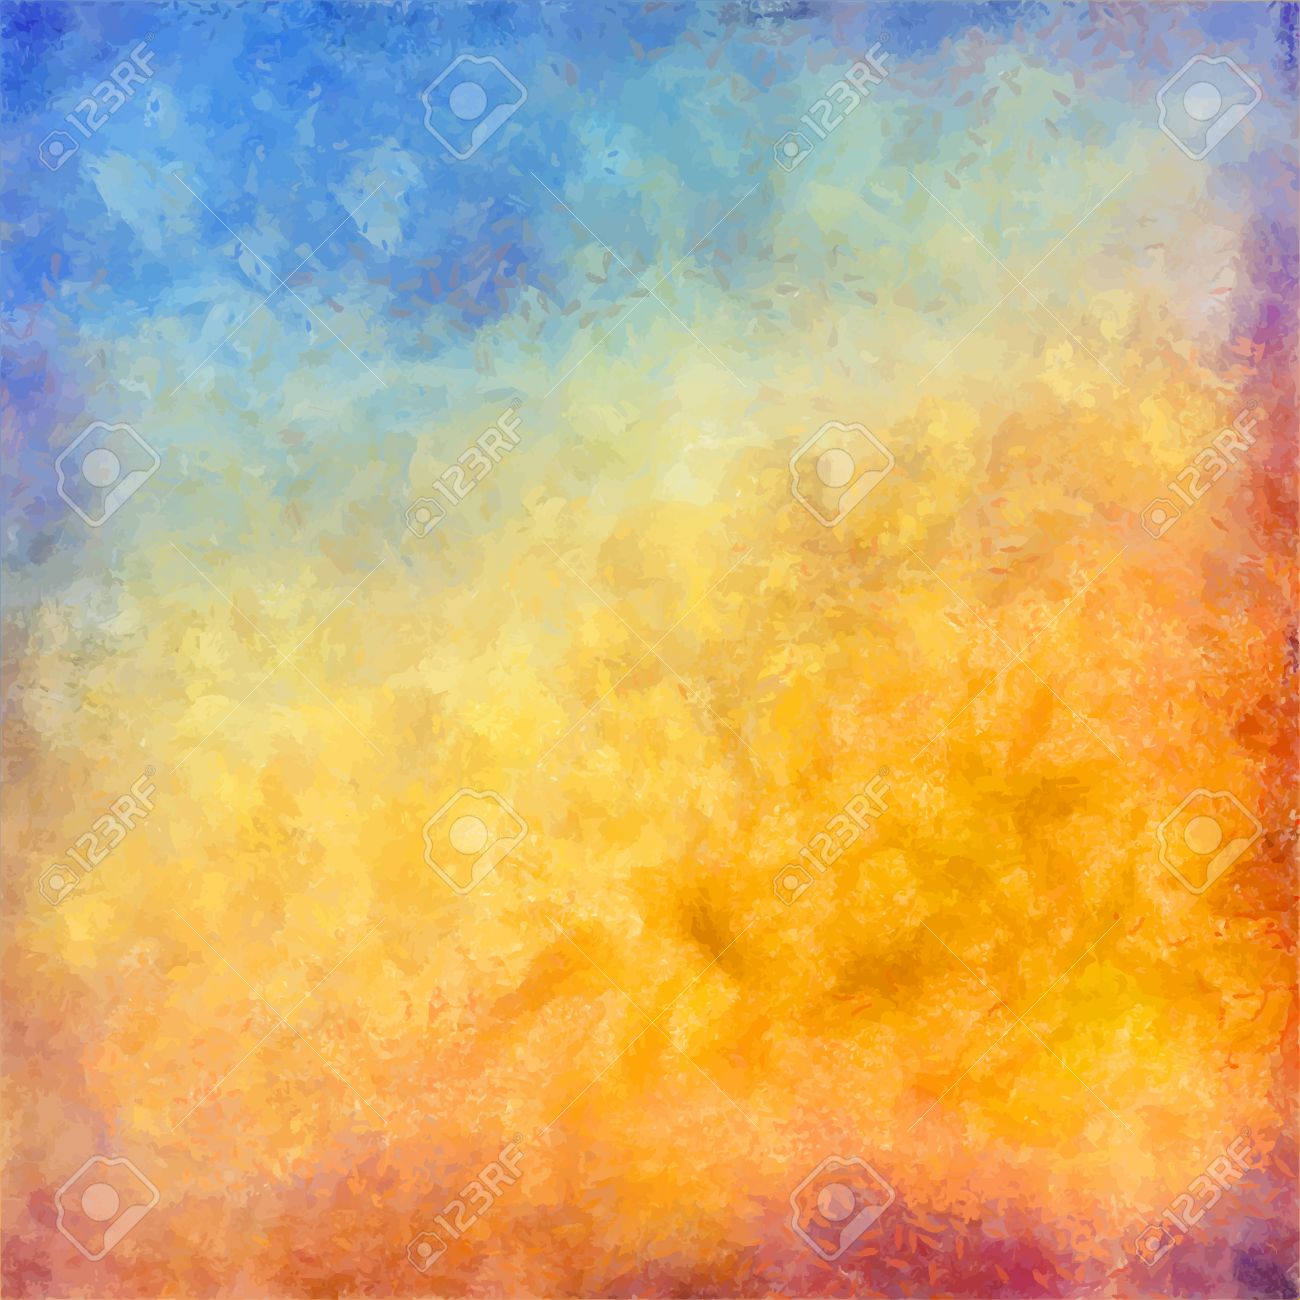 Abstract Autumn Vector Digital Oil Painting Background Royalty